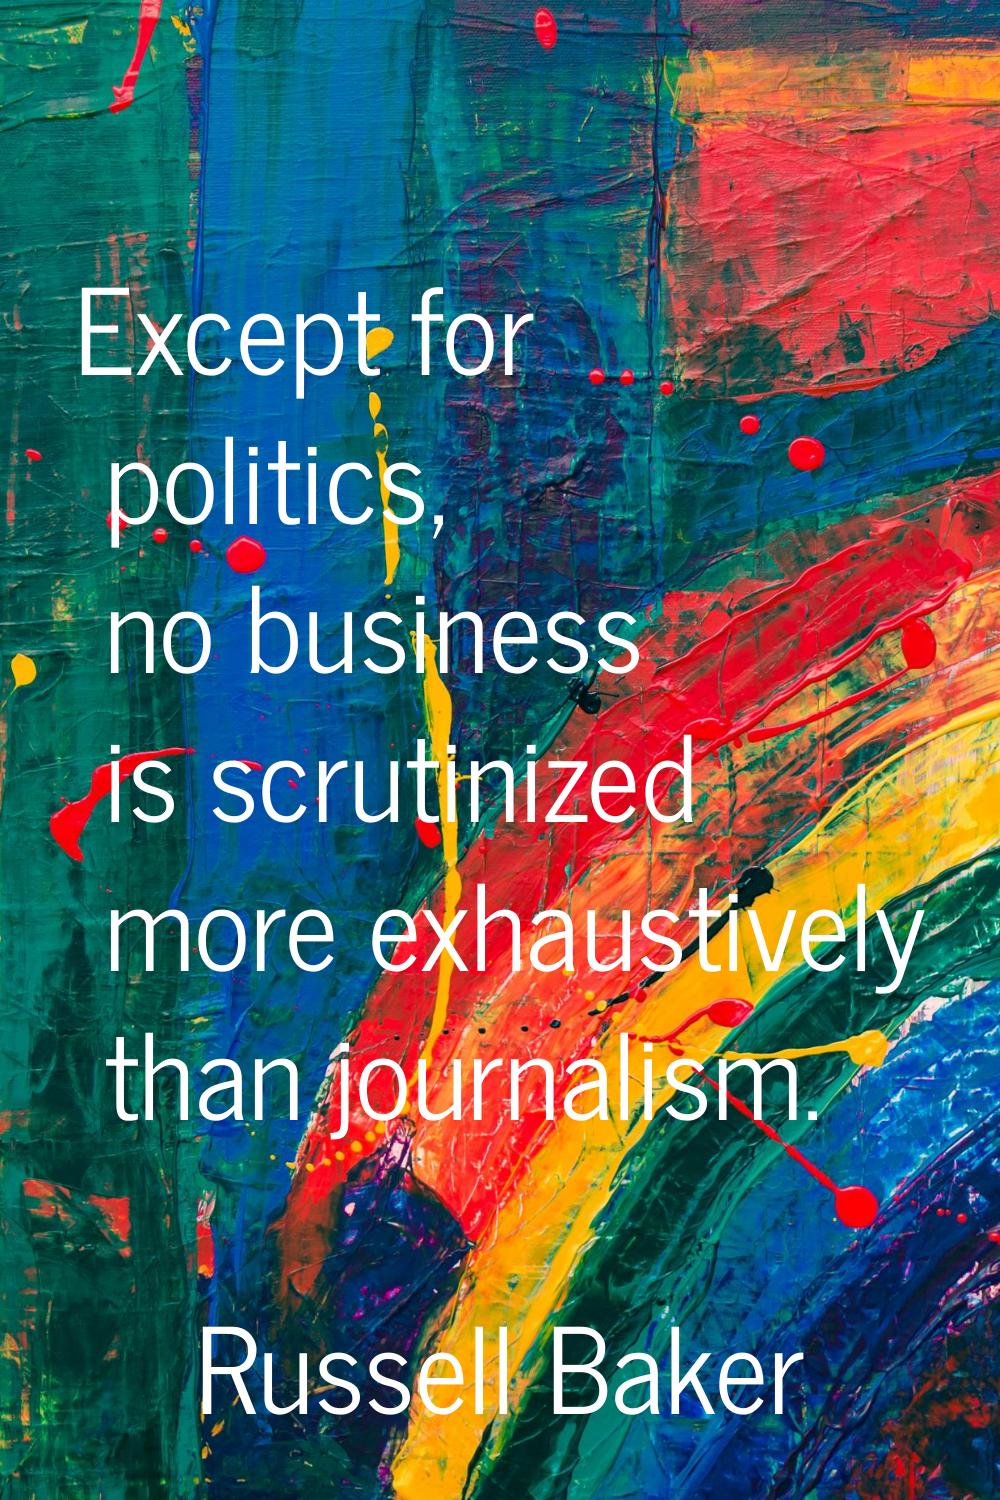 Except for politics, no business is scrutinized more exhaustively than journalism.